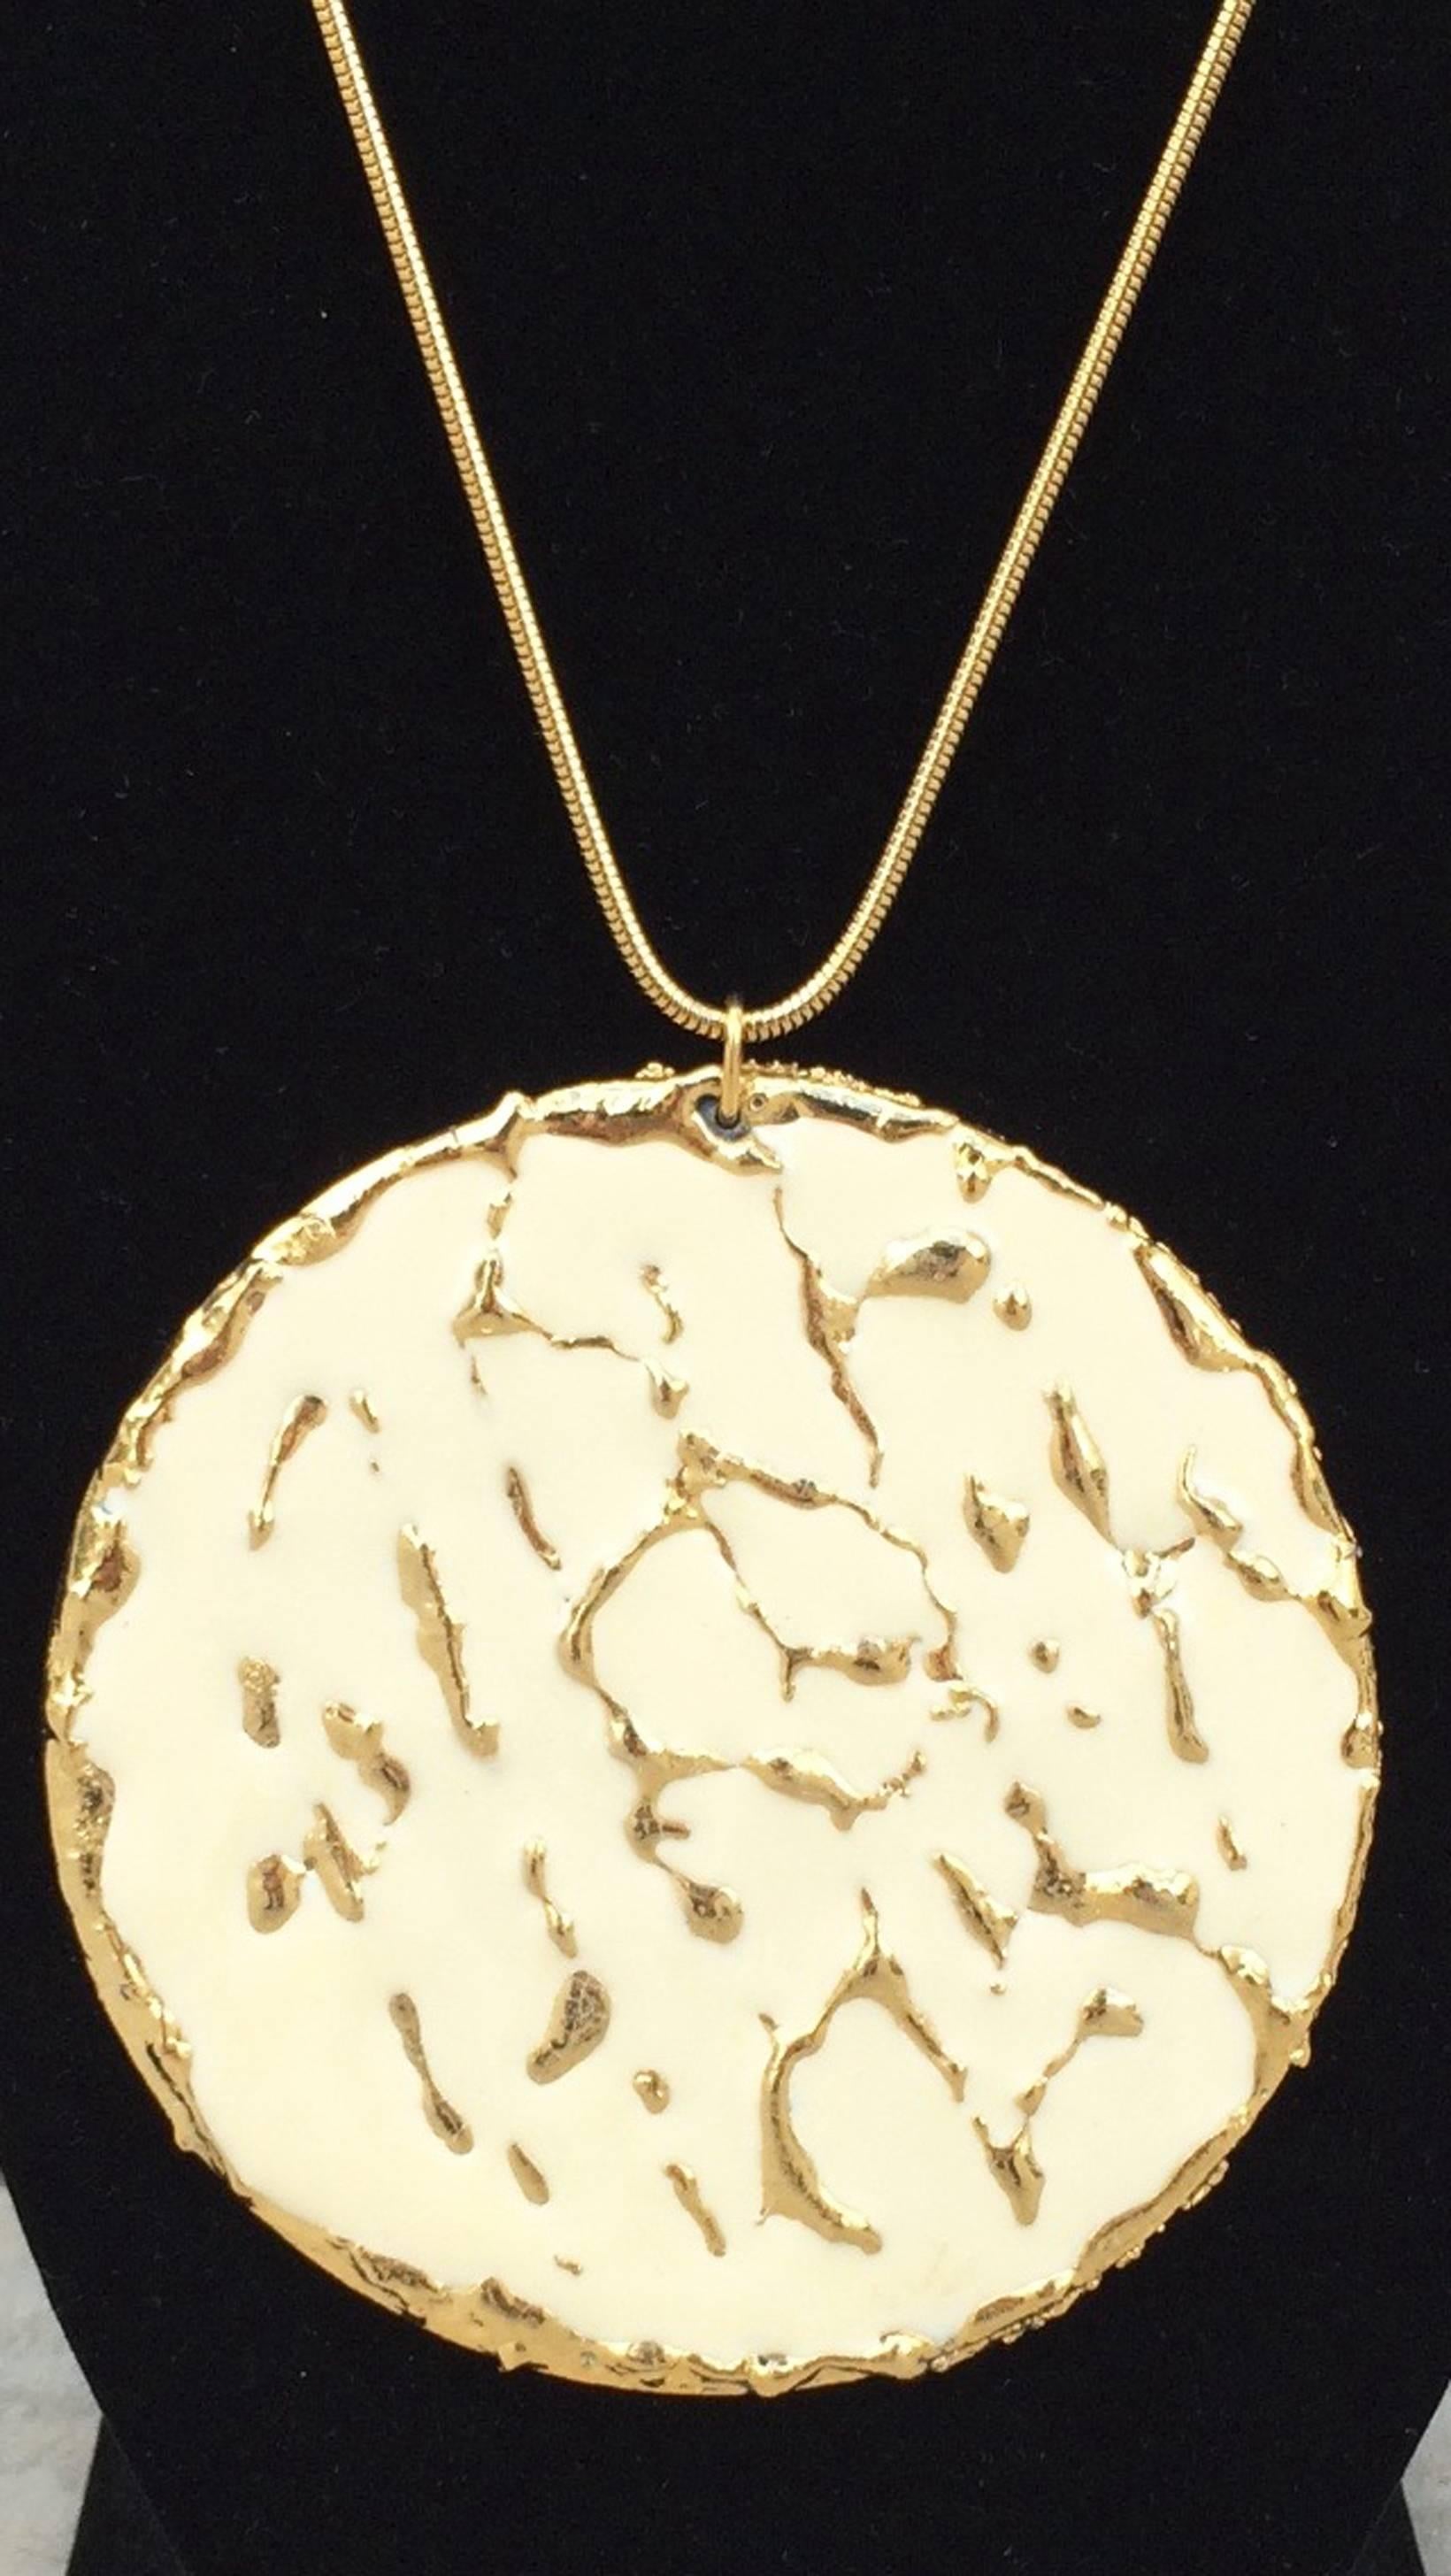 A fine and rare William de Lillo one-off prototype pendant necklace. Hand constructed gilt metal item features a cream enamel front in the brutalist manner. Item suspends from a matching gilt snake chain with locking barrel closure. Item directly